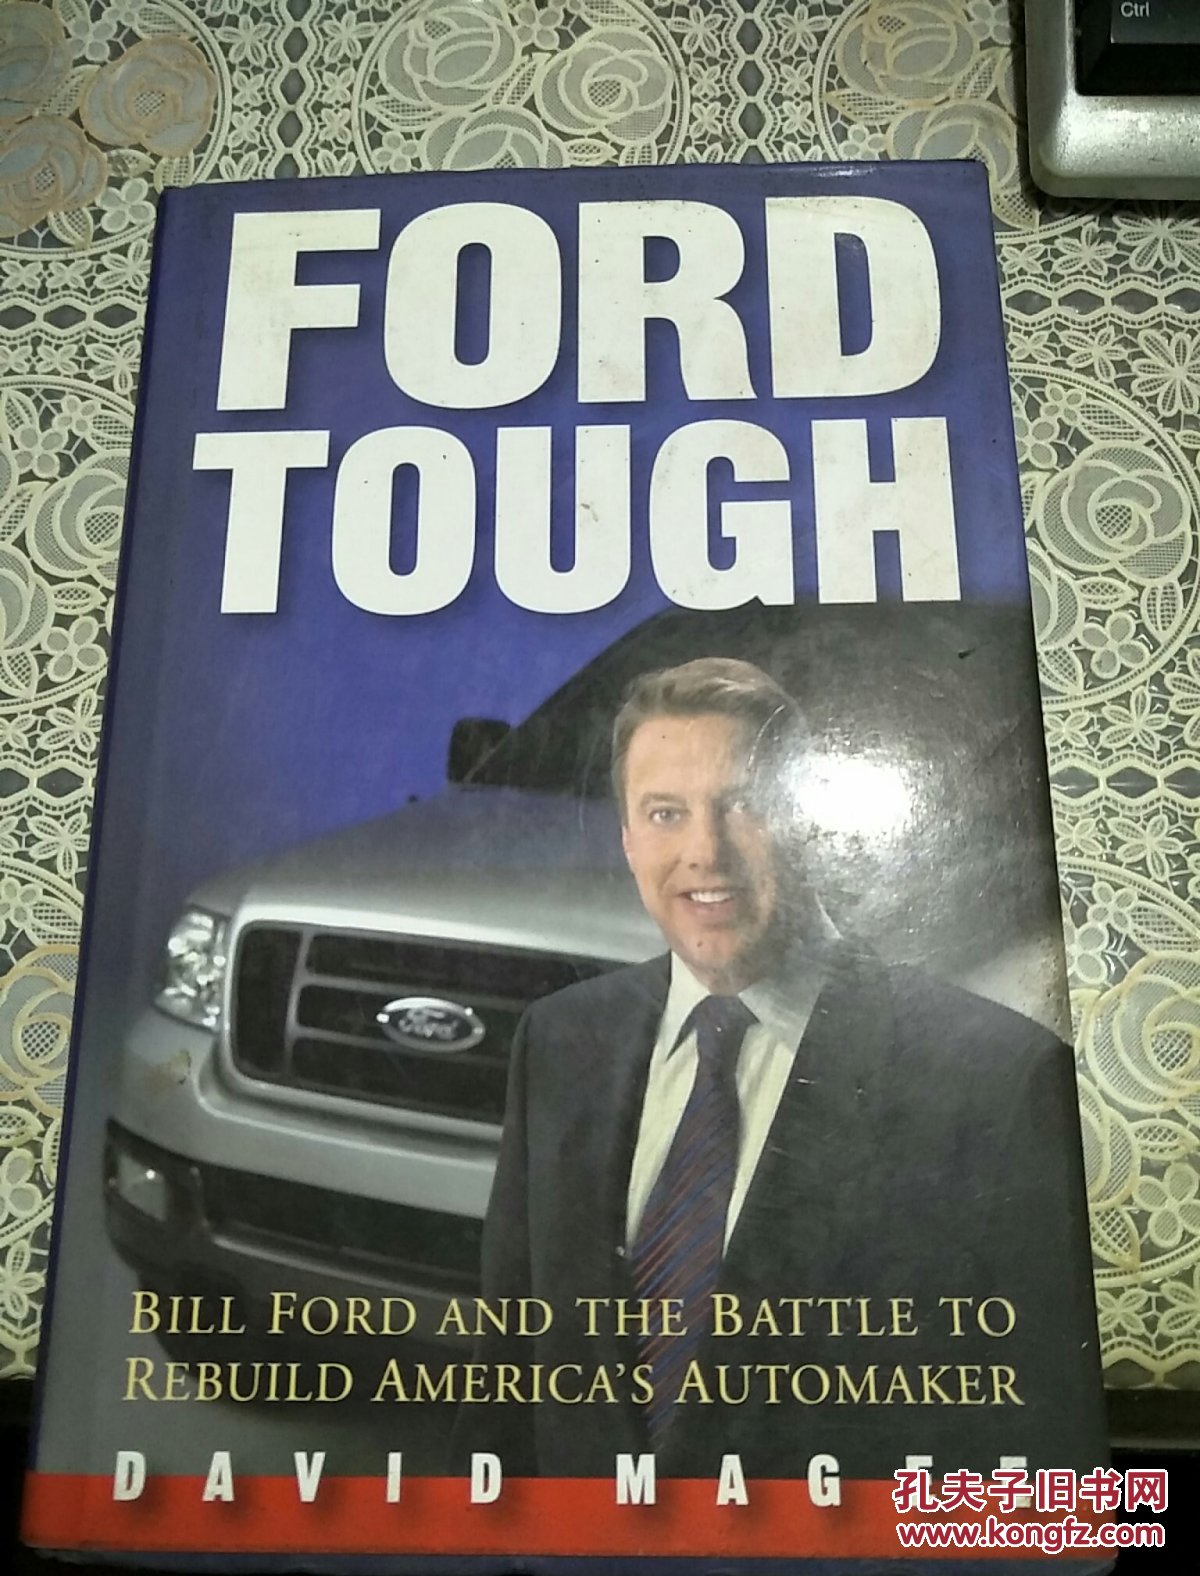 FORD TOUGH BILL FORD AND THE BATTLE TO REBUILD AMERICA'S AUTOMAKER DAVID MAGEE